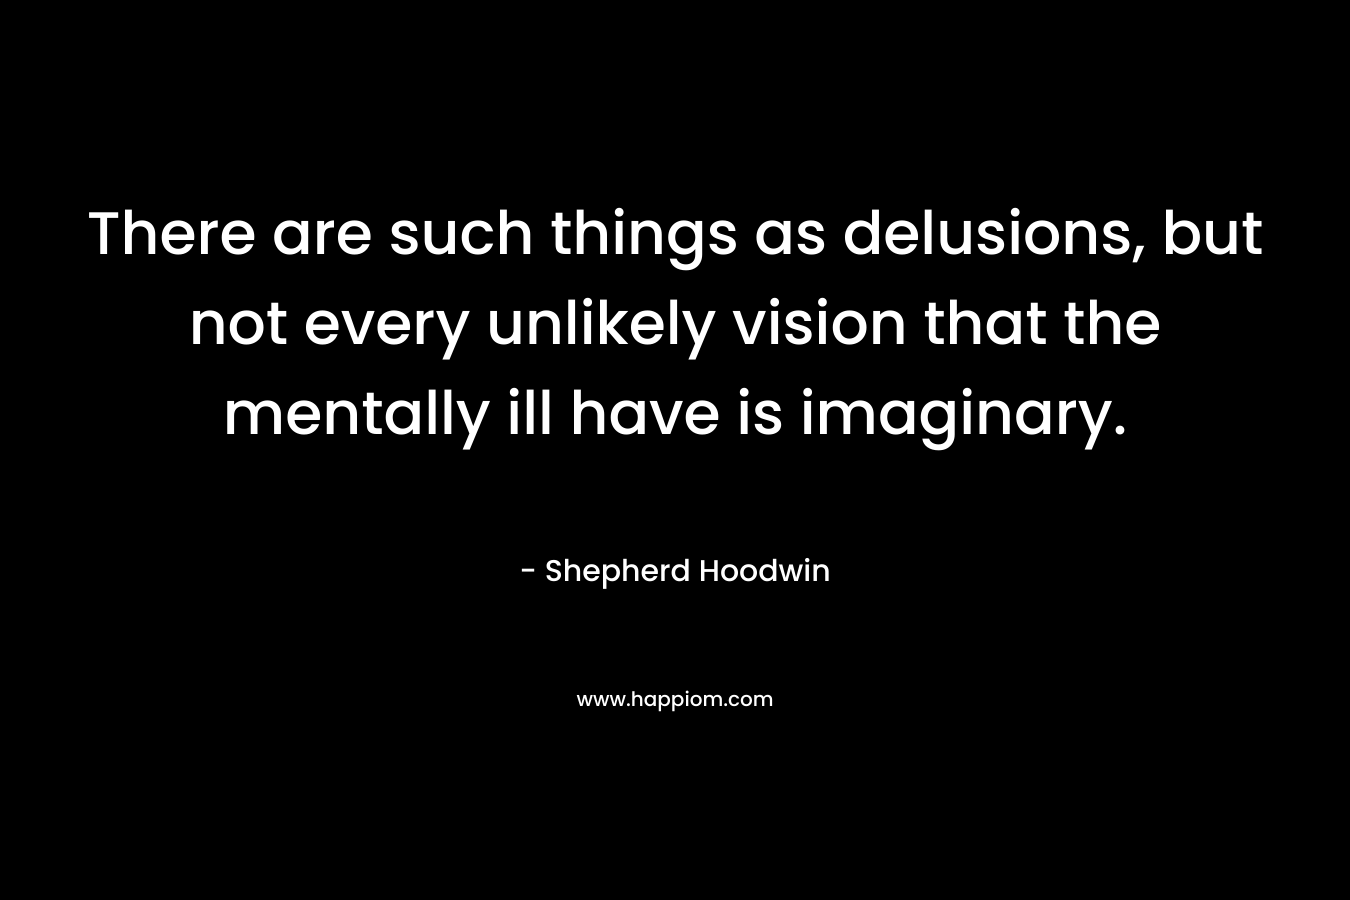 There are such things as delusions, but not every unlikely vision that the mentally ill have is imaginary. – Shepherd Hoodwin